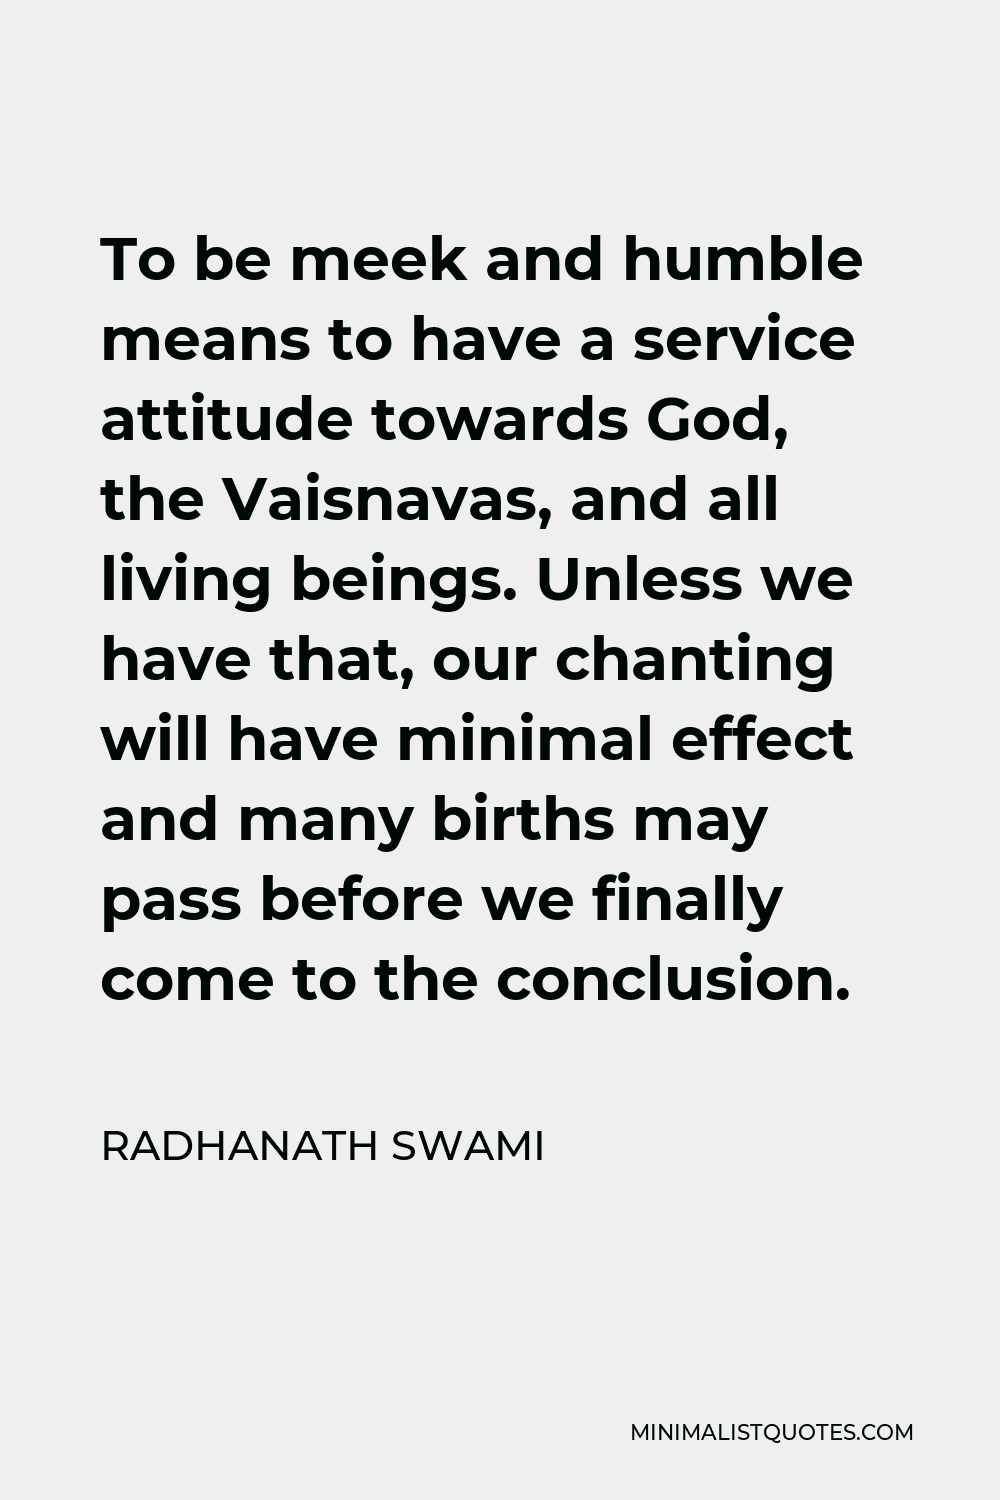 Radhanath Swami Quote - To be meek and humble means to have a service attitude towards God, the Vaisnavas, and all living beings. Unless we have that, our chanting will have minimal effect and many births may pass before we finally come to the conclusion.